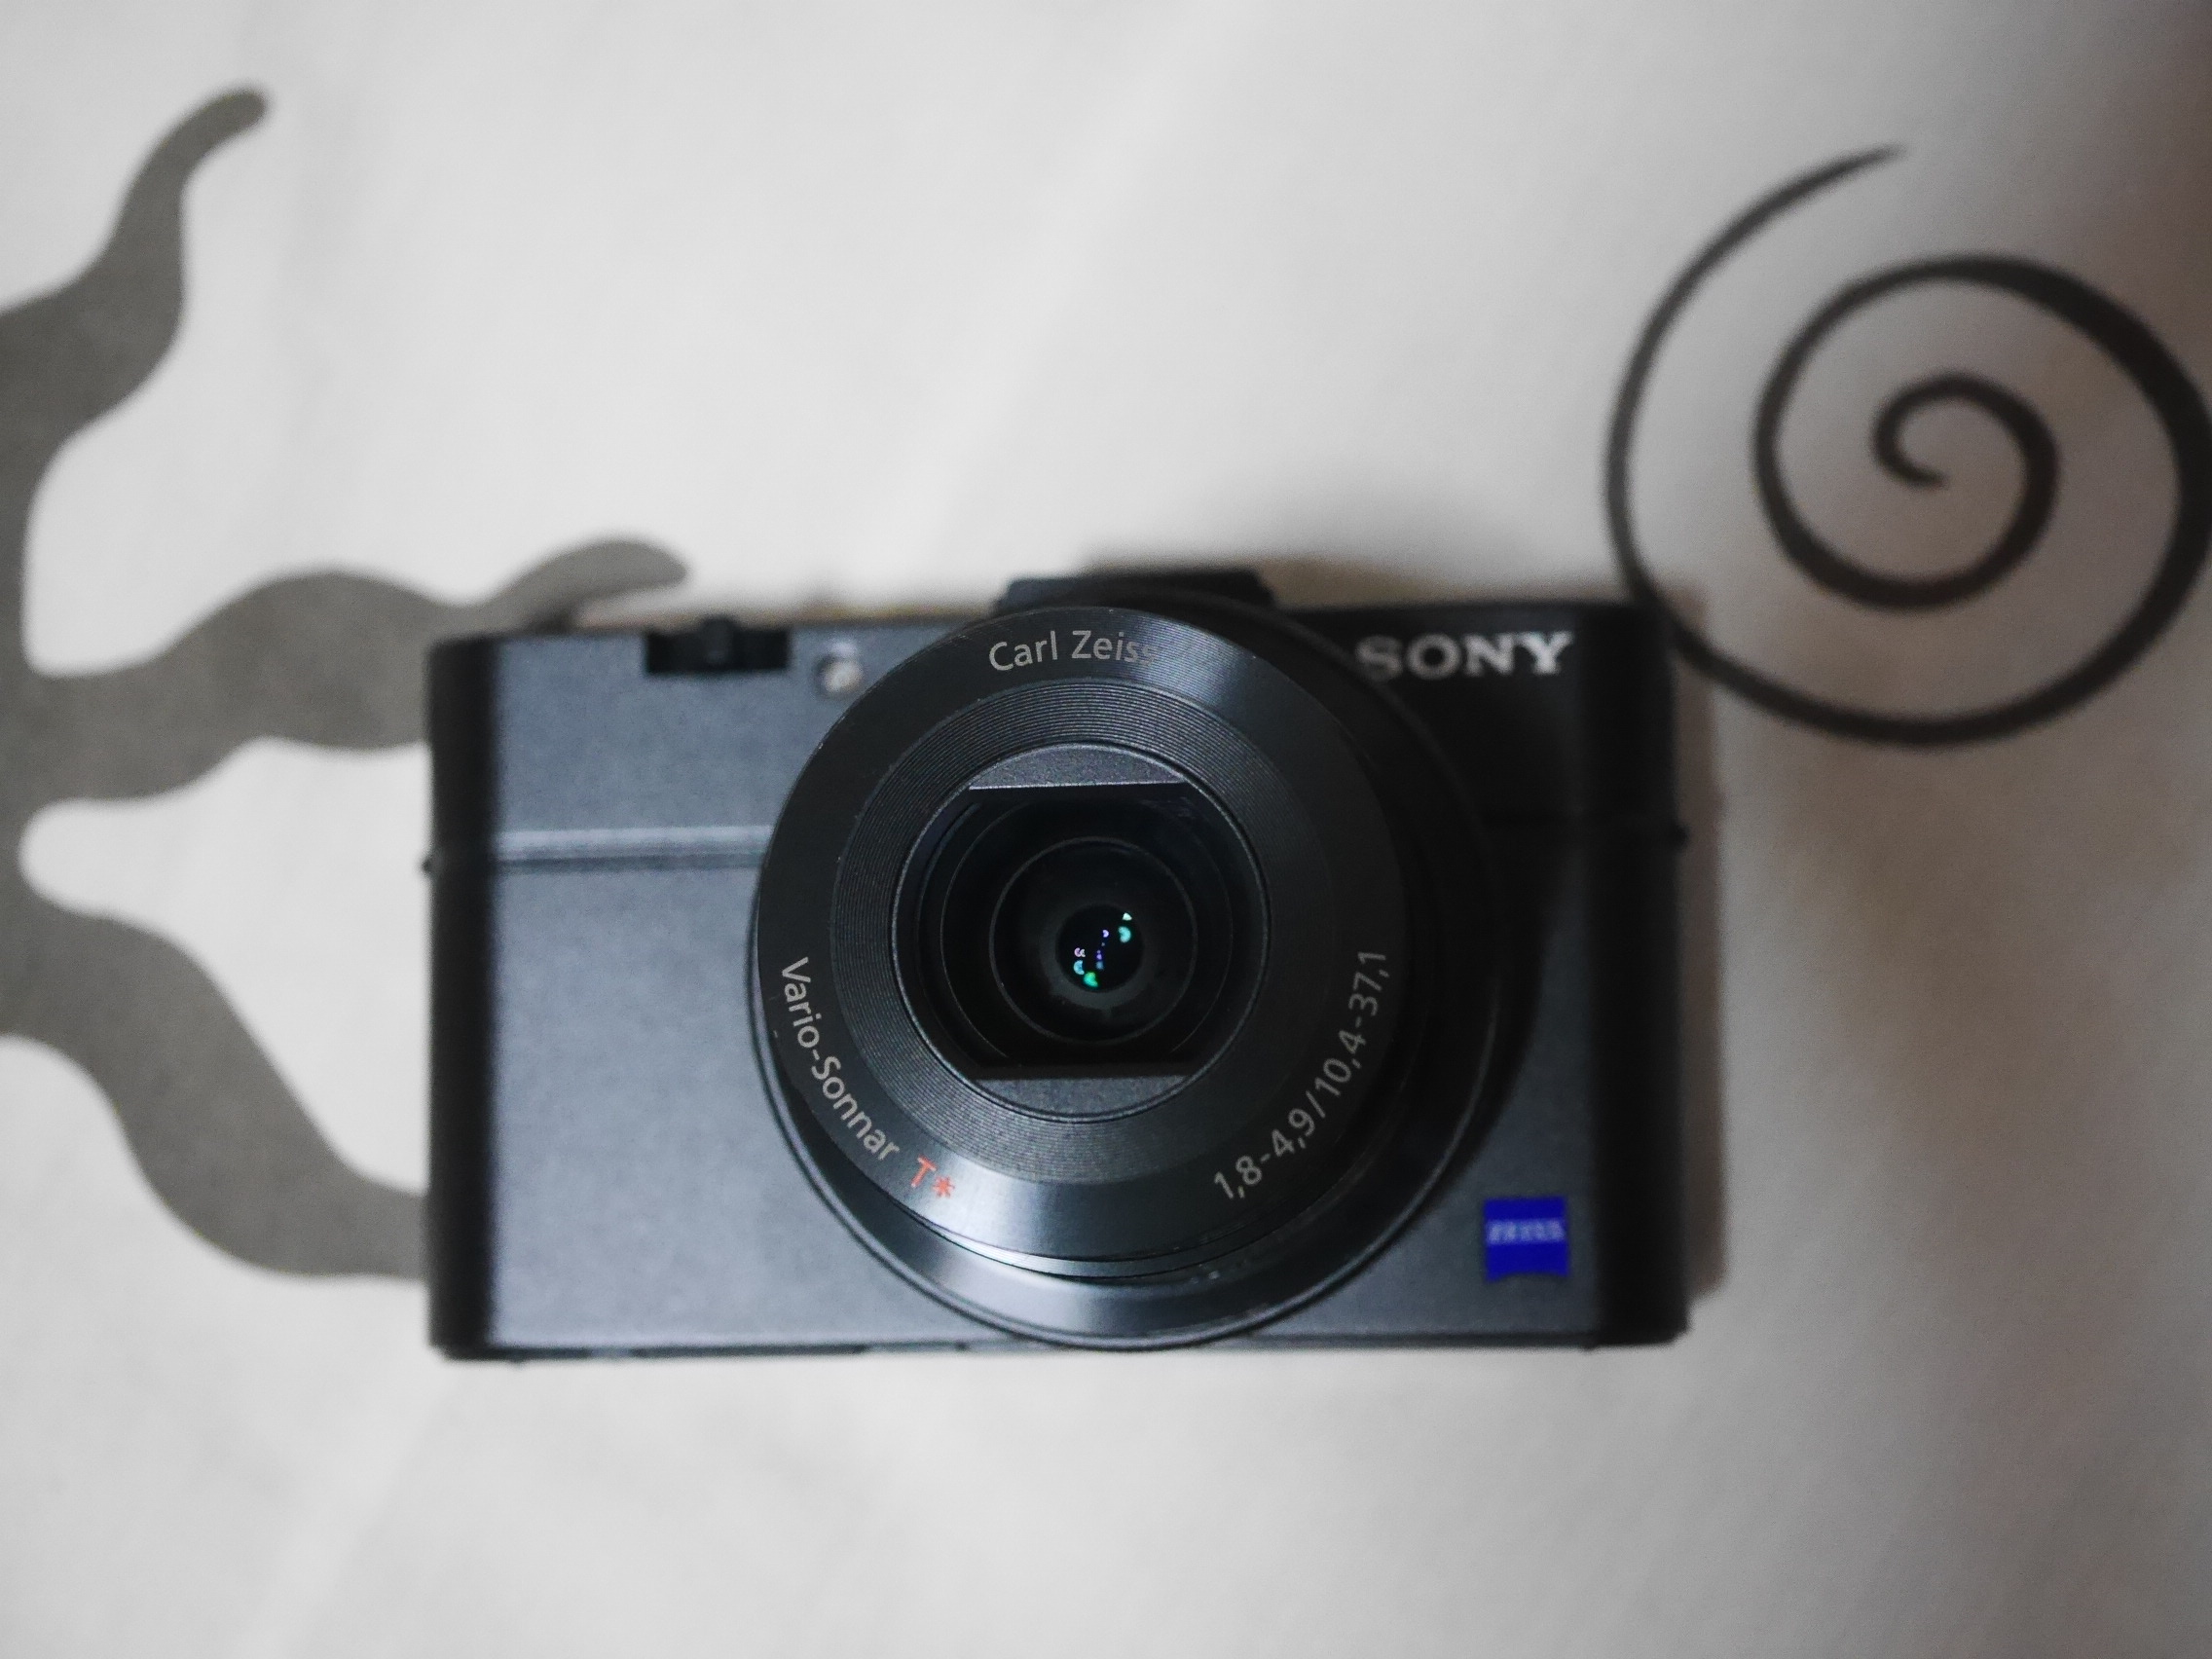 Sony RX100 M2 Wi-Fi w/NFC Advanced Camera with 1.0 inch sensor and Carl ZEISS Vario-Sonnar T* Lens, DSC-RX100M2, RX100 Mark 2